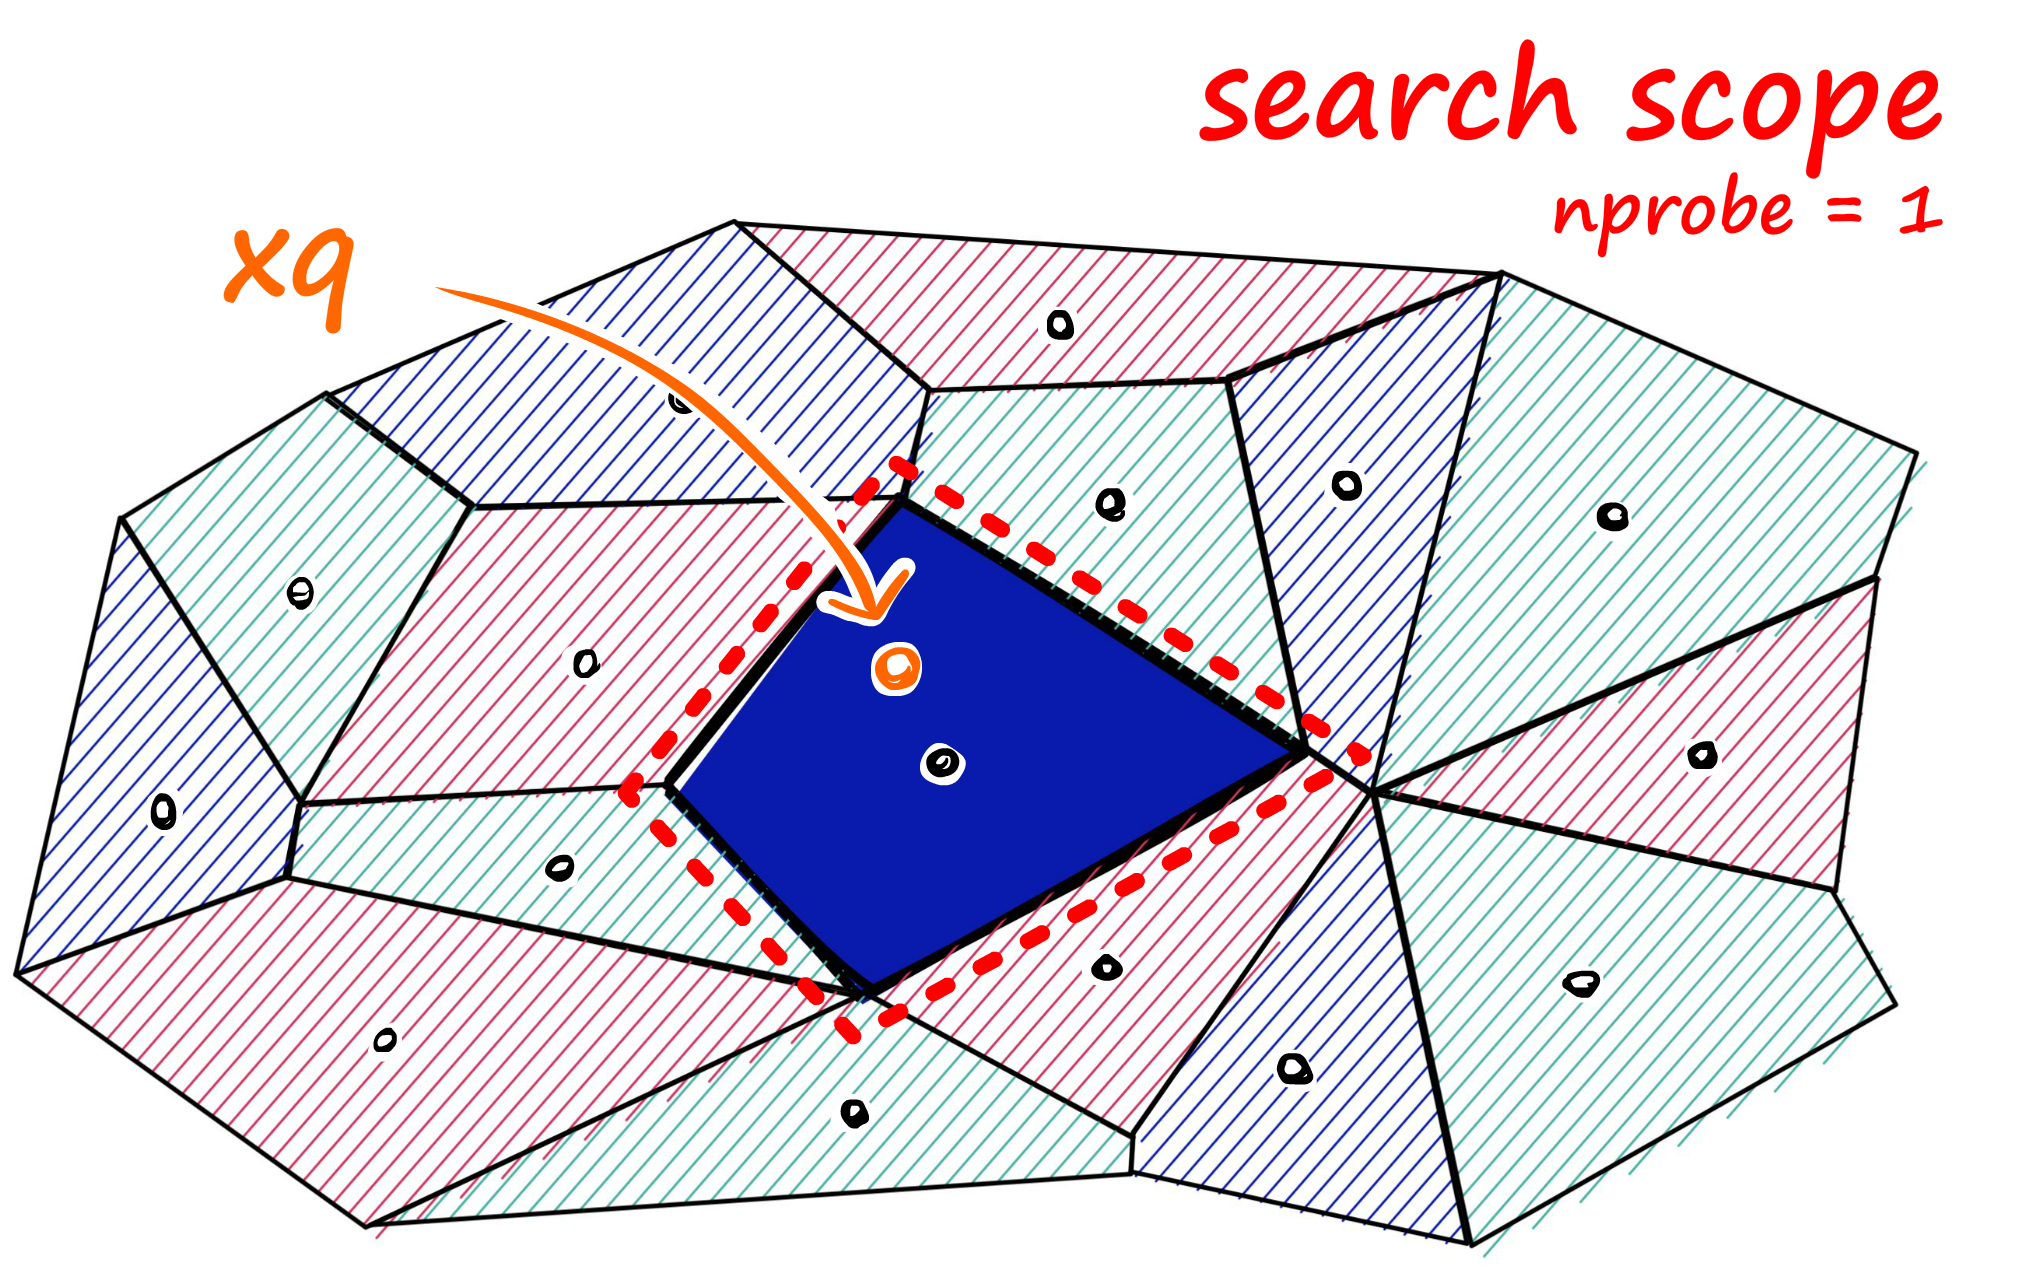 Increasing nprobe increases our search scope.